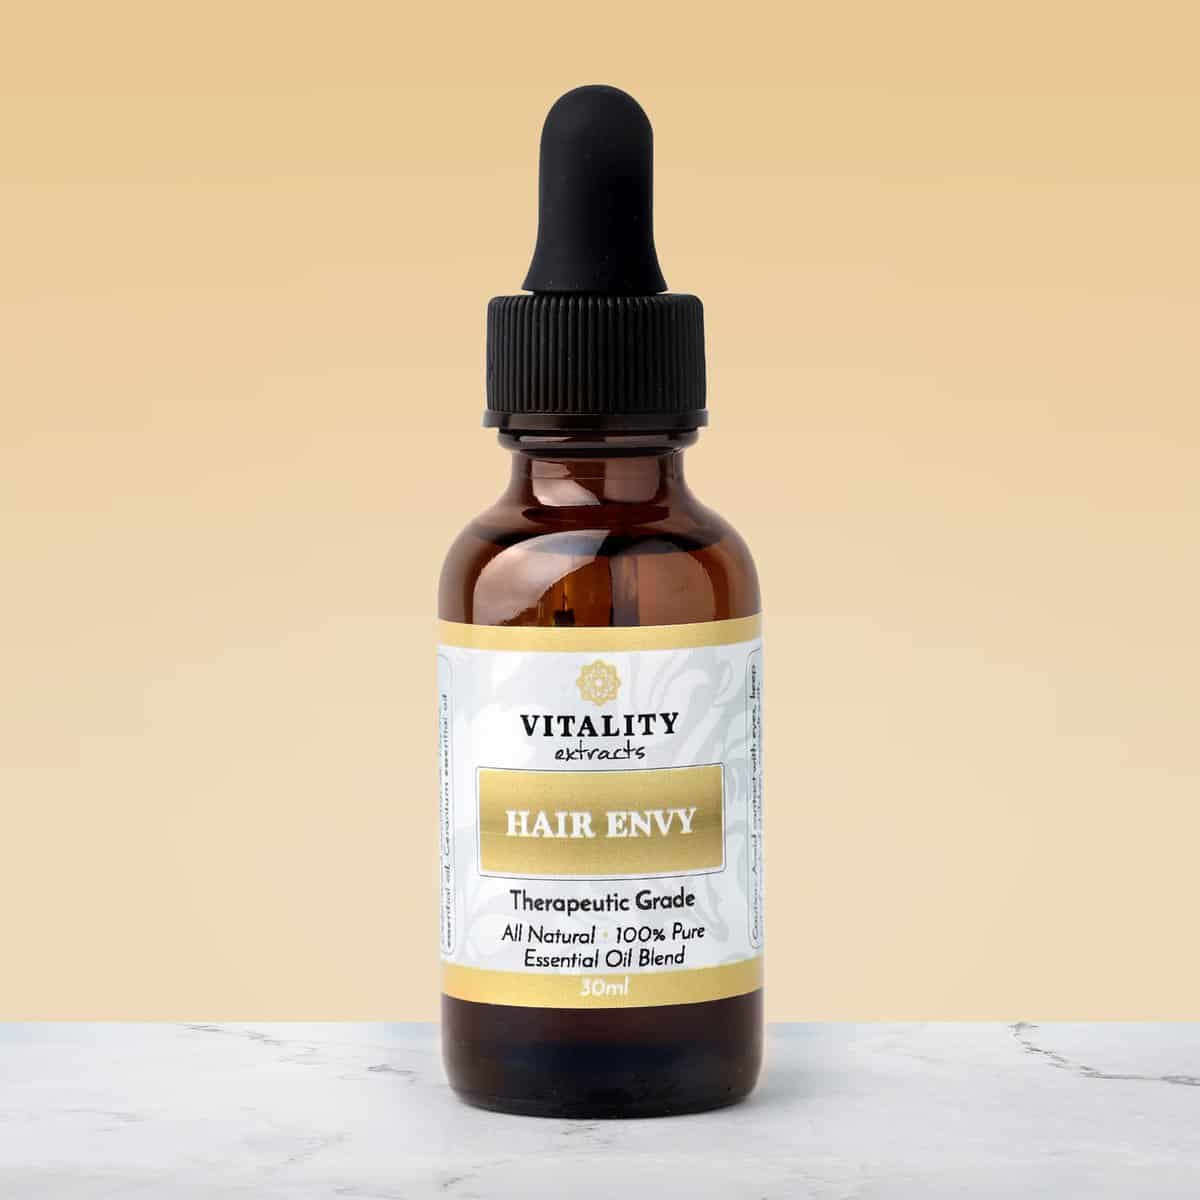 Hair Envy Reviews from Vitality Extracts: